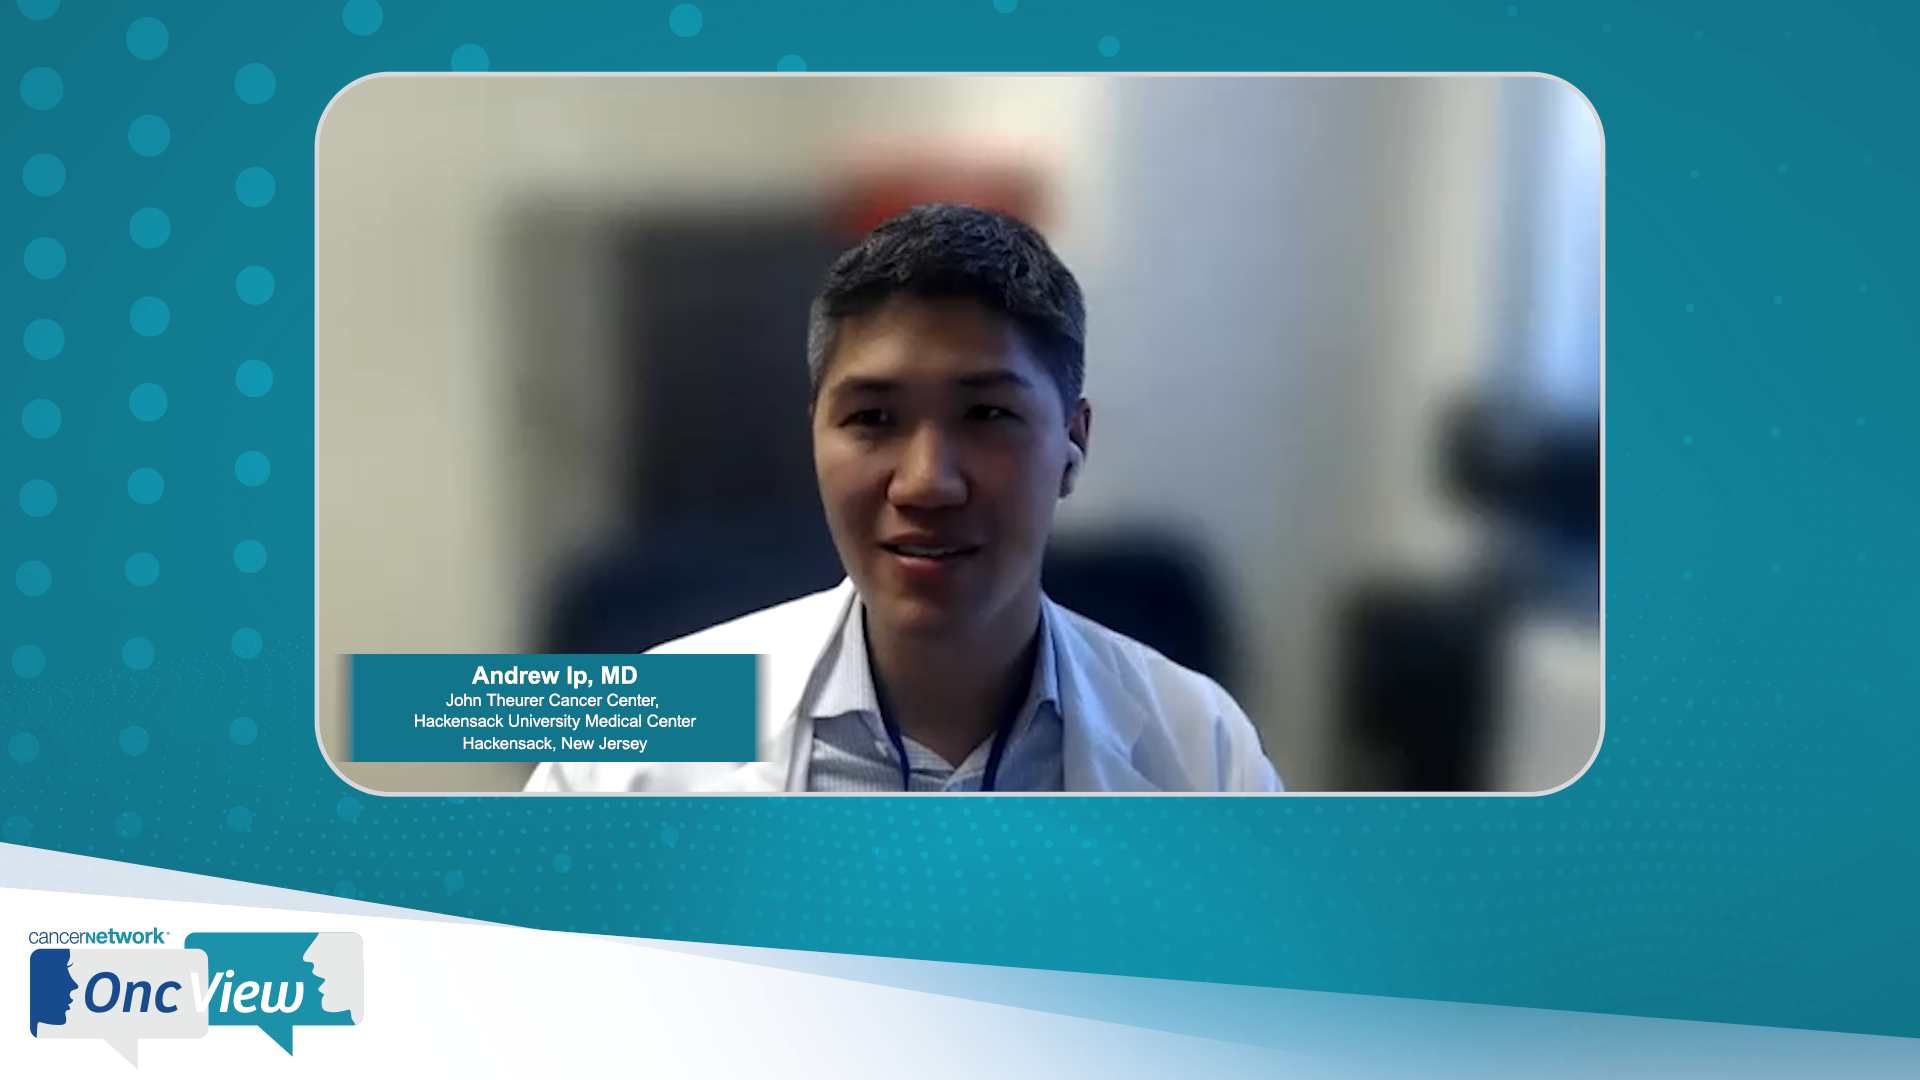 Andrew Ip, MD, an expert on diffuse large B-cell lymphoma